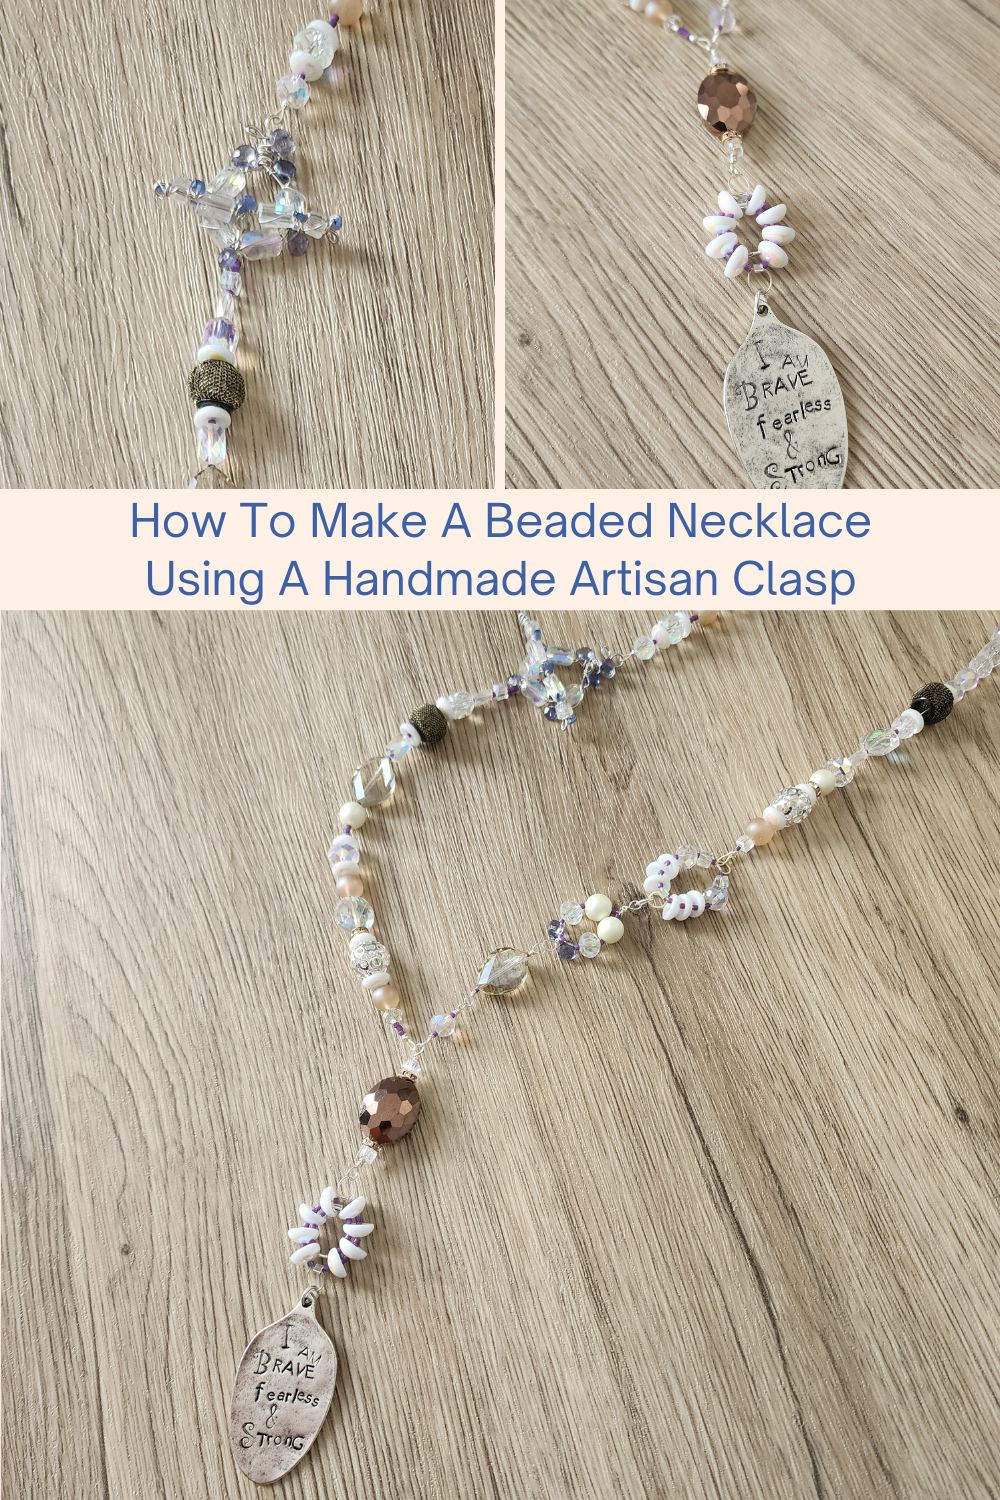 How To Make A Beaded Necklace Using A Handmade Artisan Clasp Collage